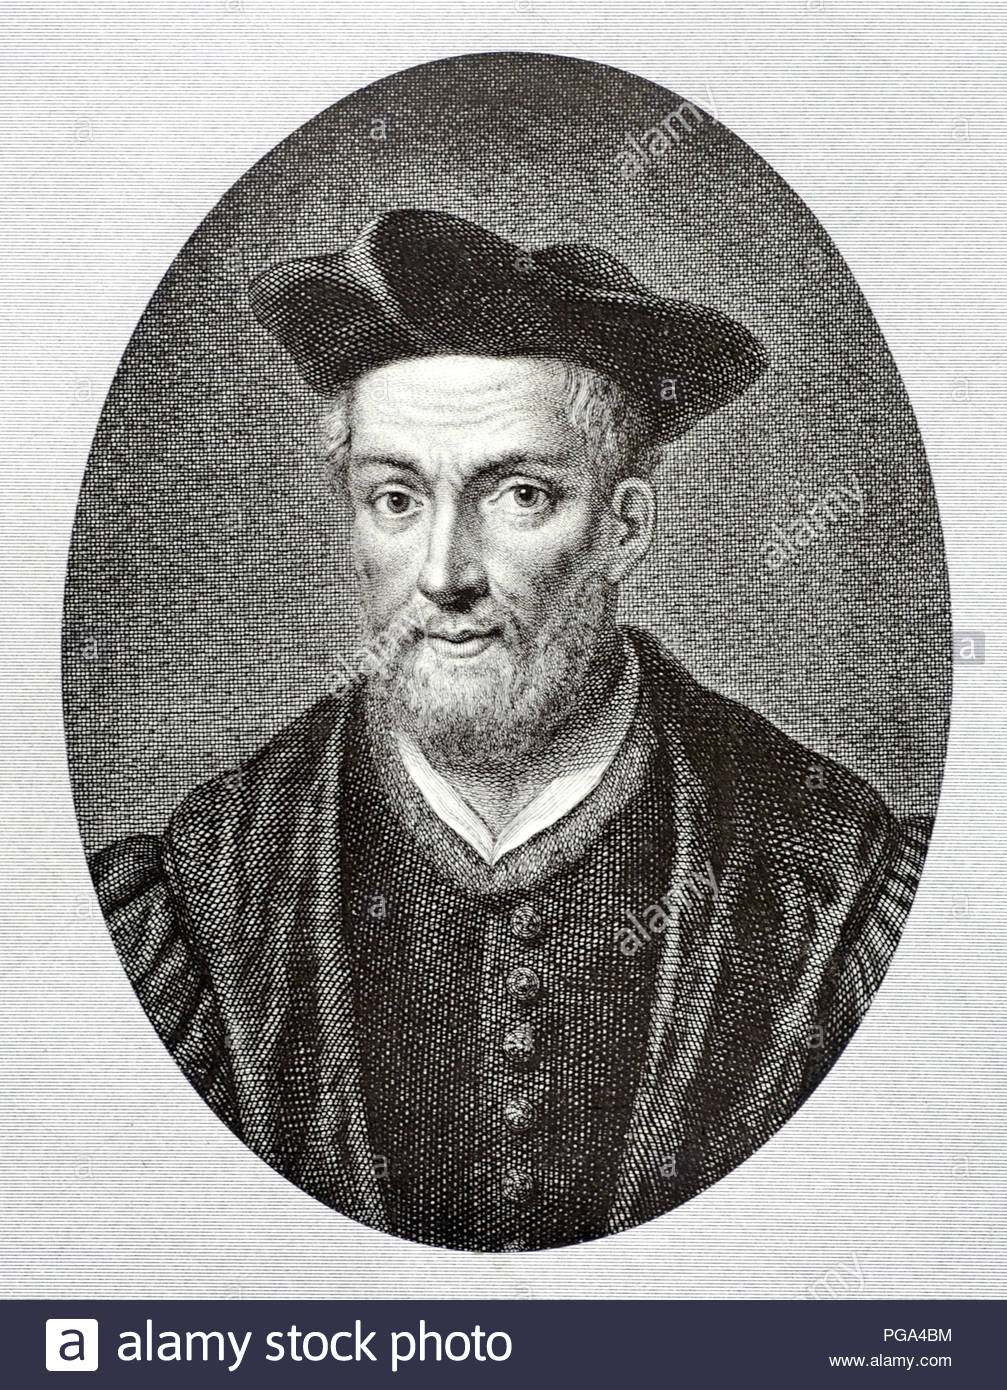 François Rabelais portrait 1483 and 1494 – 1553 was a French Renaissance writer, physician, Renaissance humanist, monk and Greek scholar, antique illustration from 1880 Stock Photo